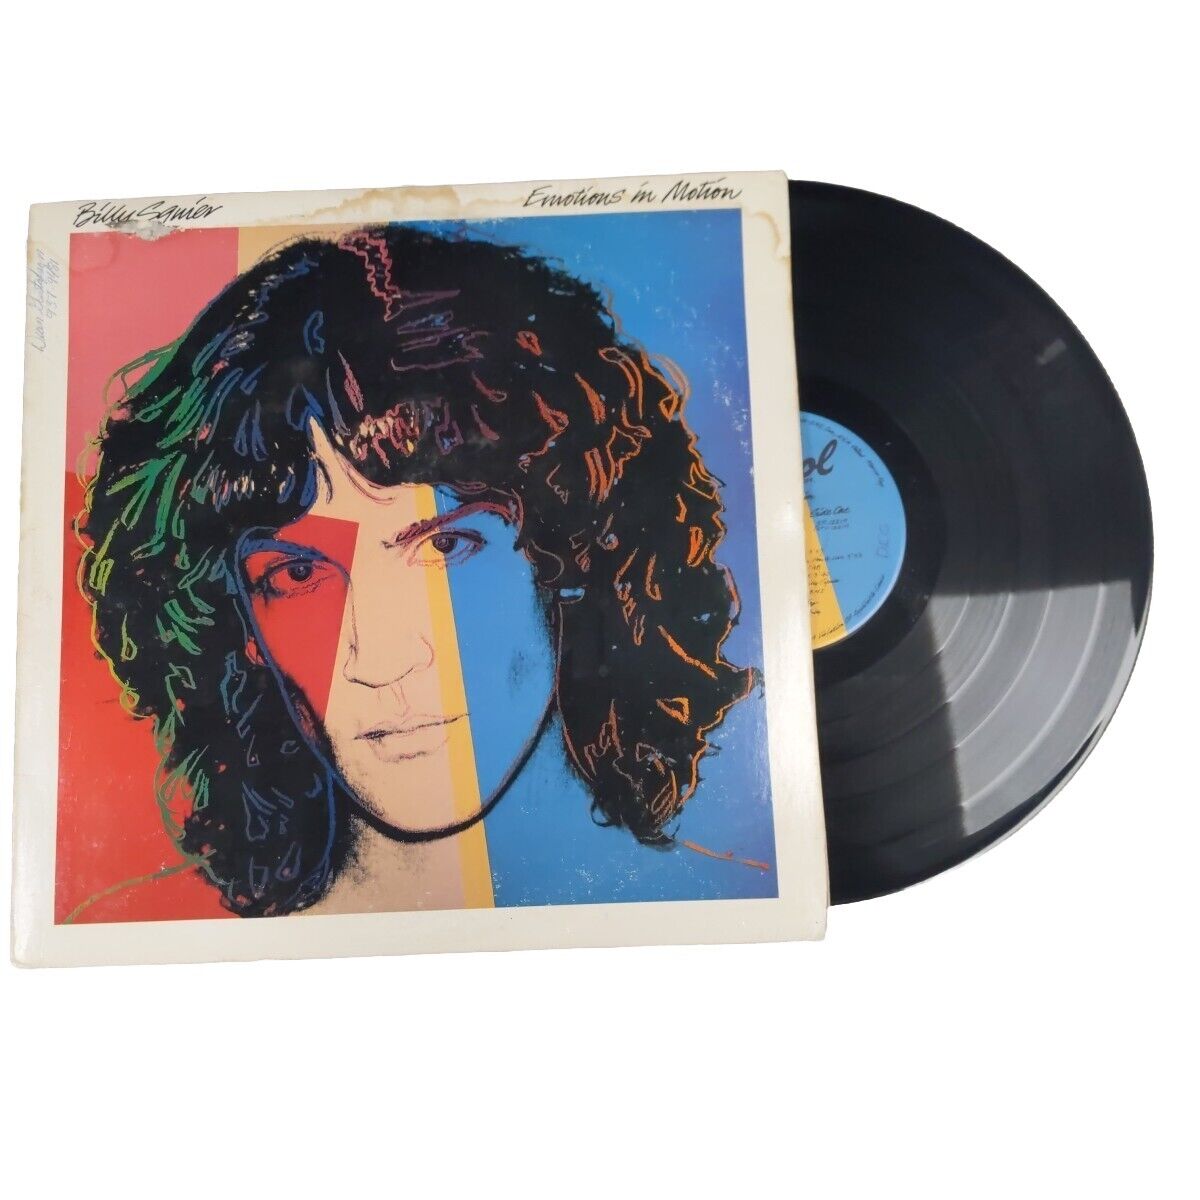 Billy Squier - Emotions in Motion Vinyl Record 1982 Rock Classic ST-12217